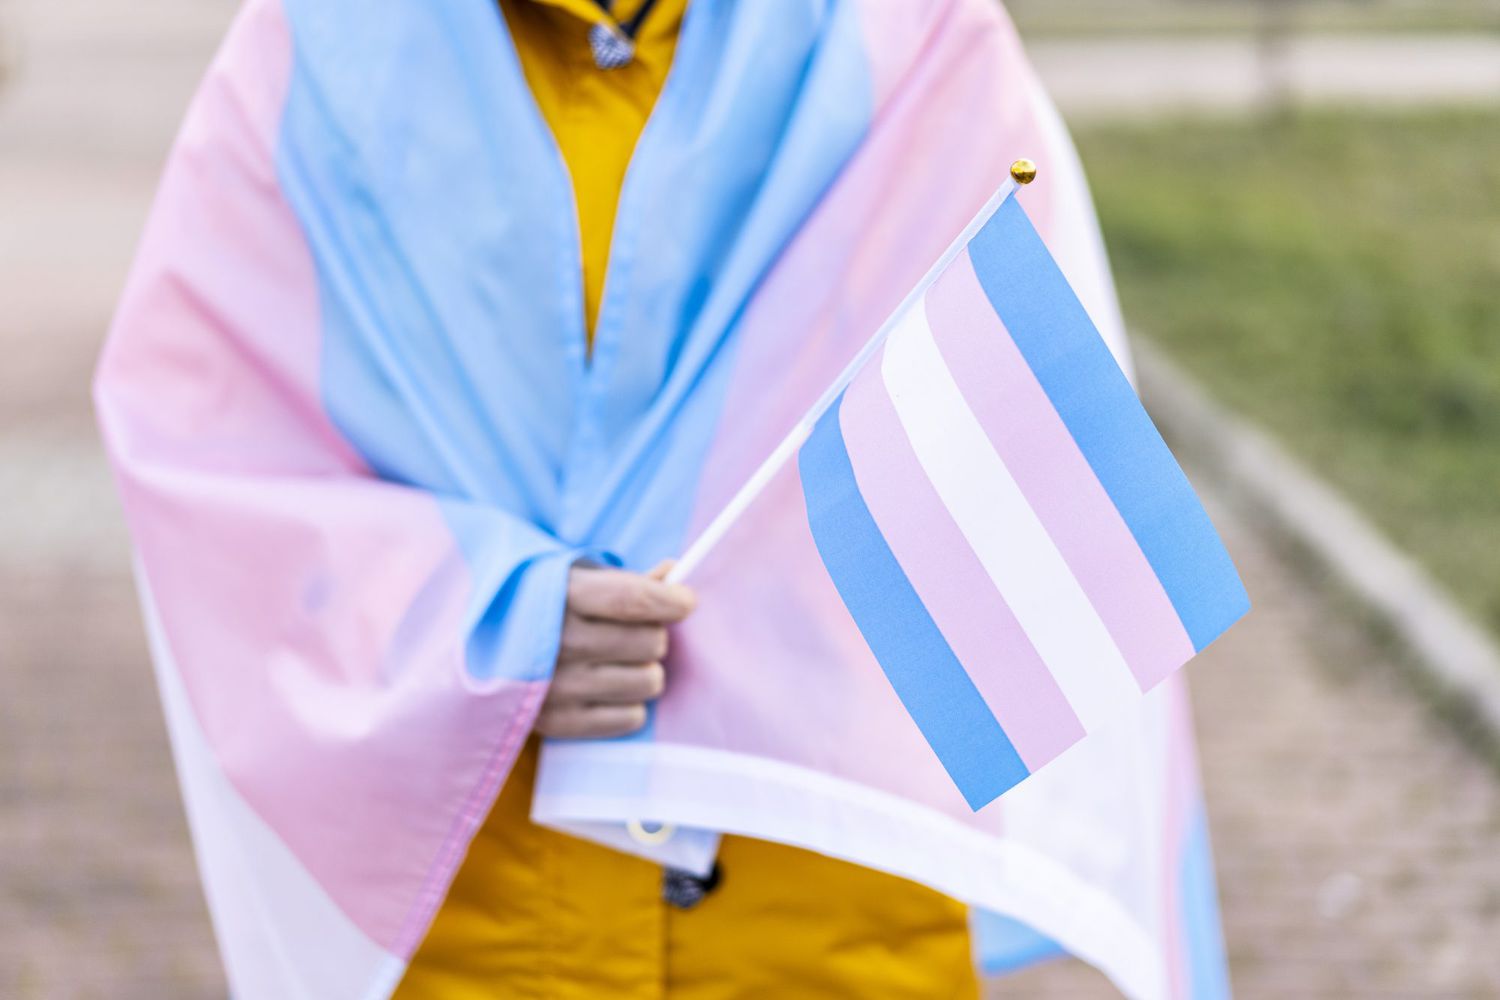 Woman covered with the transgender flag on a protest